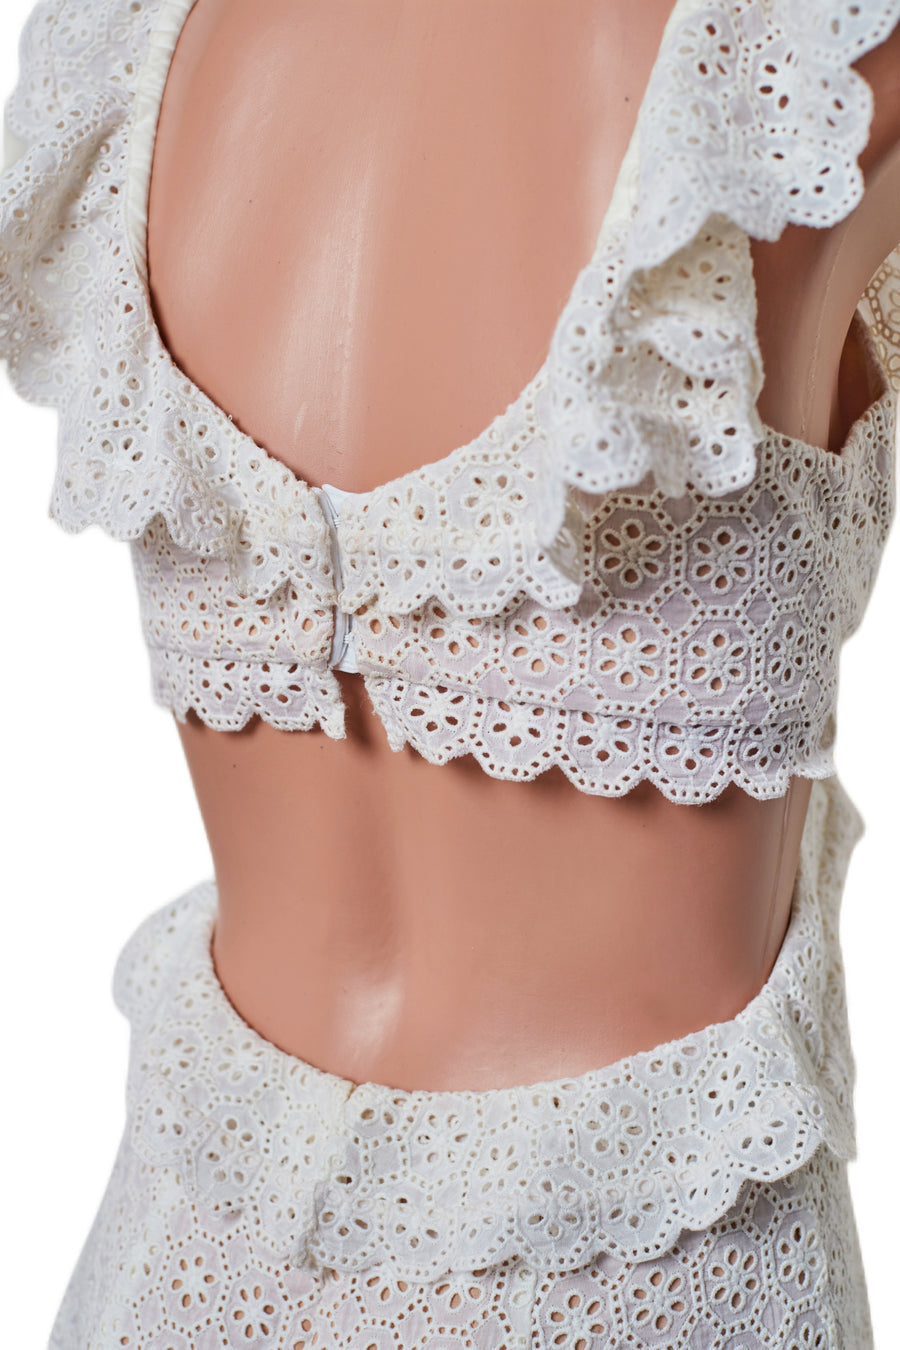 White Lace Playsuit